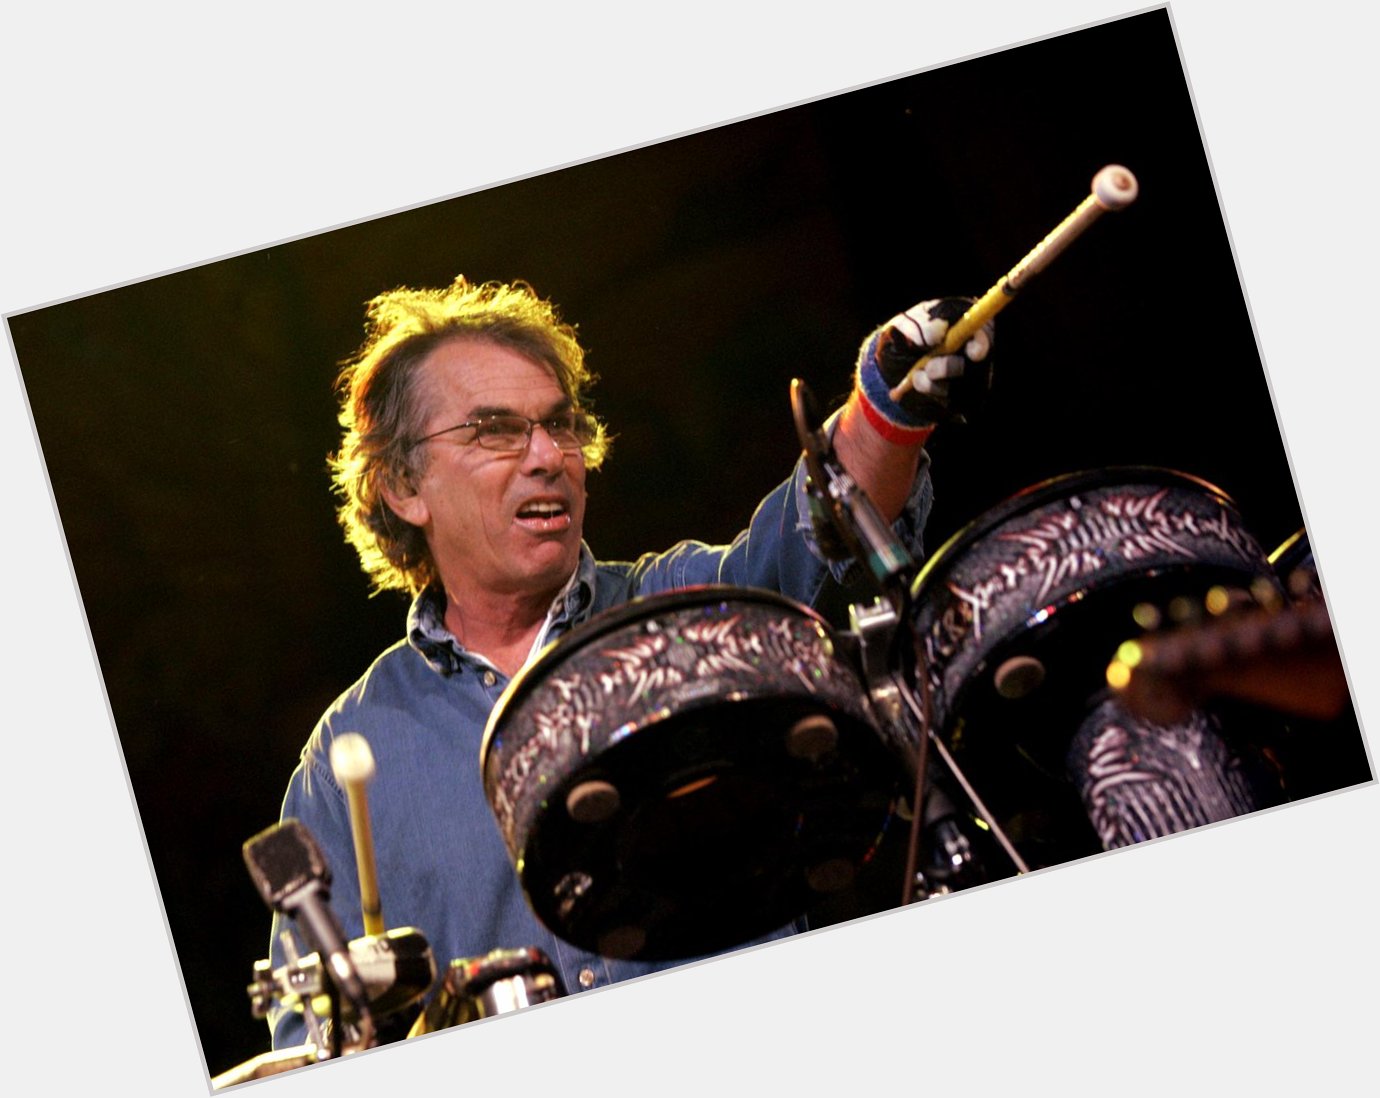  Touch Of Grey  Happy Birthday Today 9/11 to long-time Grateful Dead drummer Mickey Hart. Rock ON! 